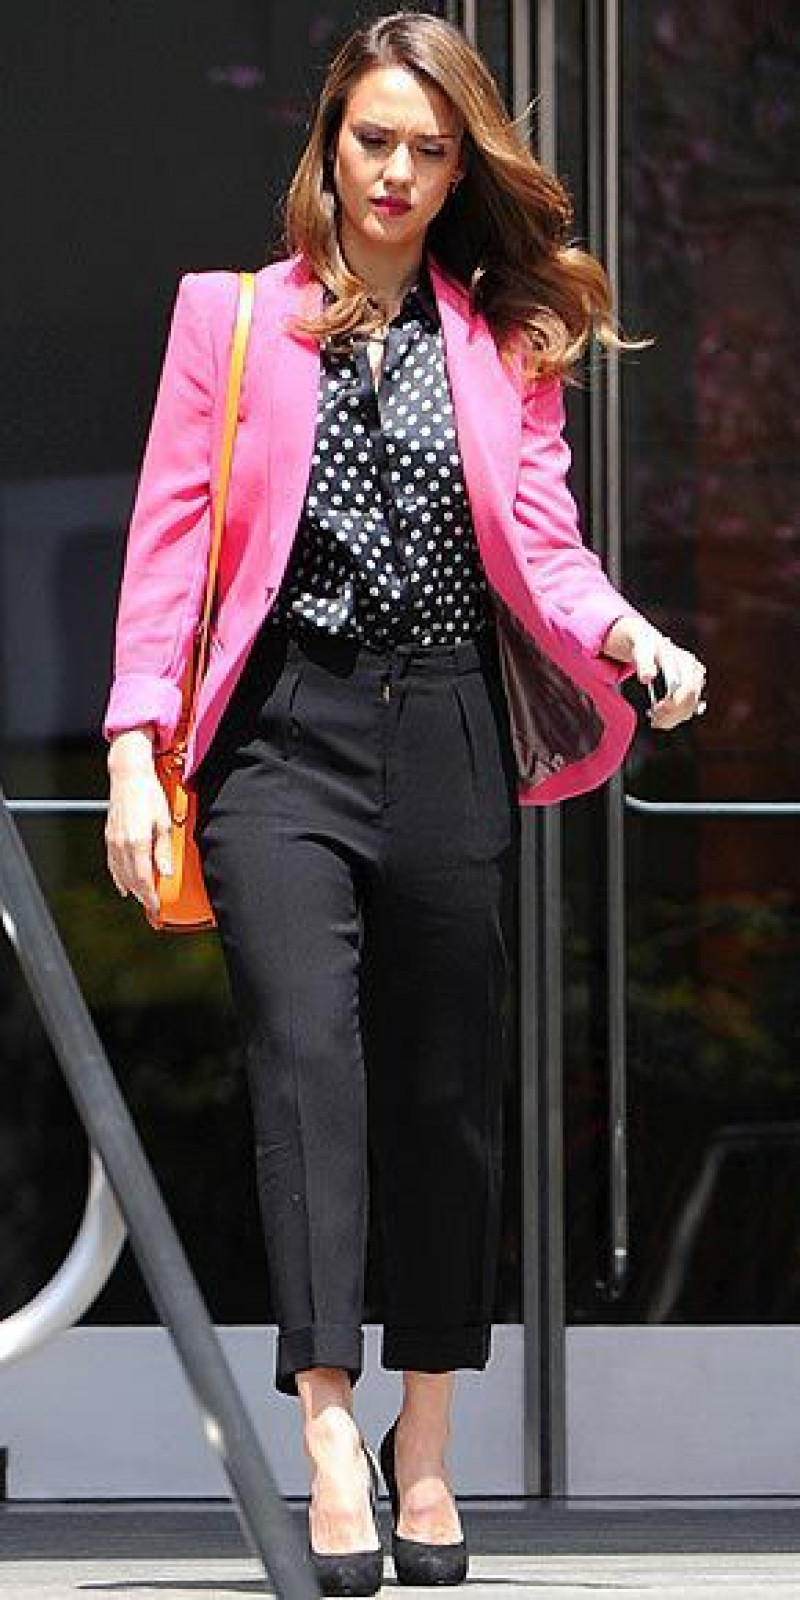 giacca fucsia outfit elegante, performing arts, leather jacket, pink suit jackets and tuxedo, black casual trouser, black pump